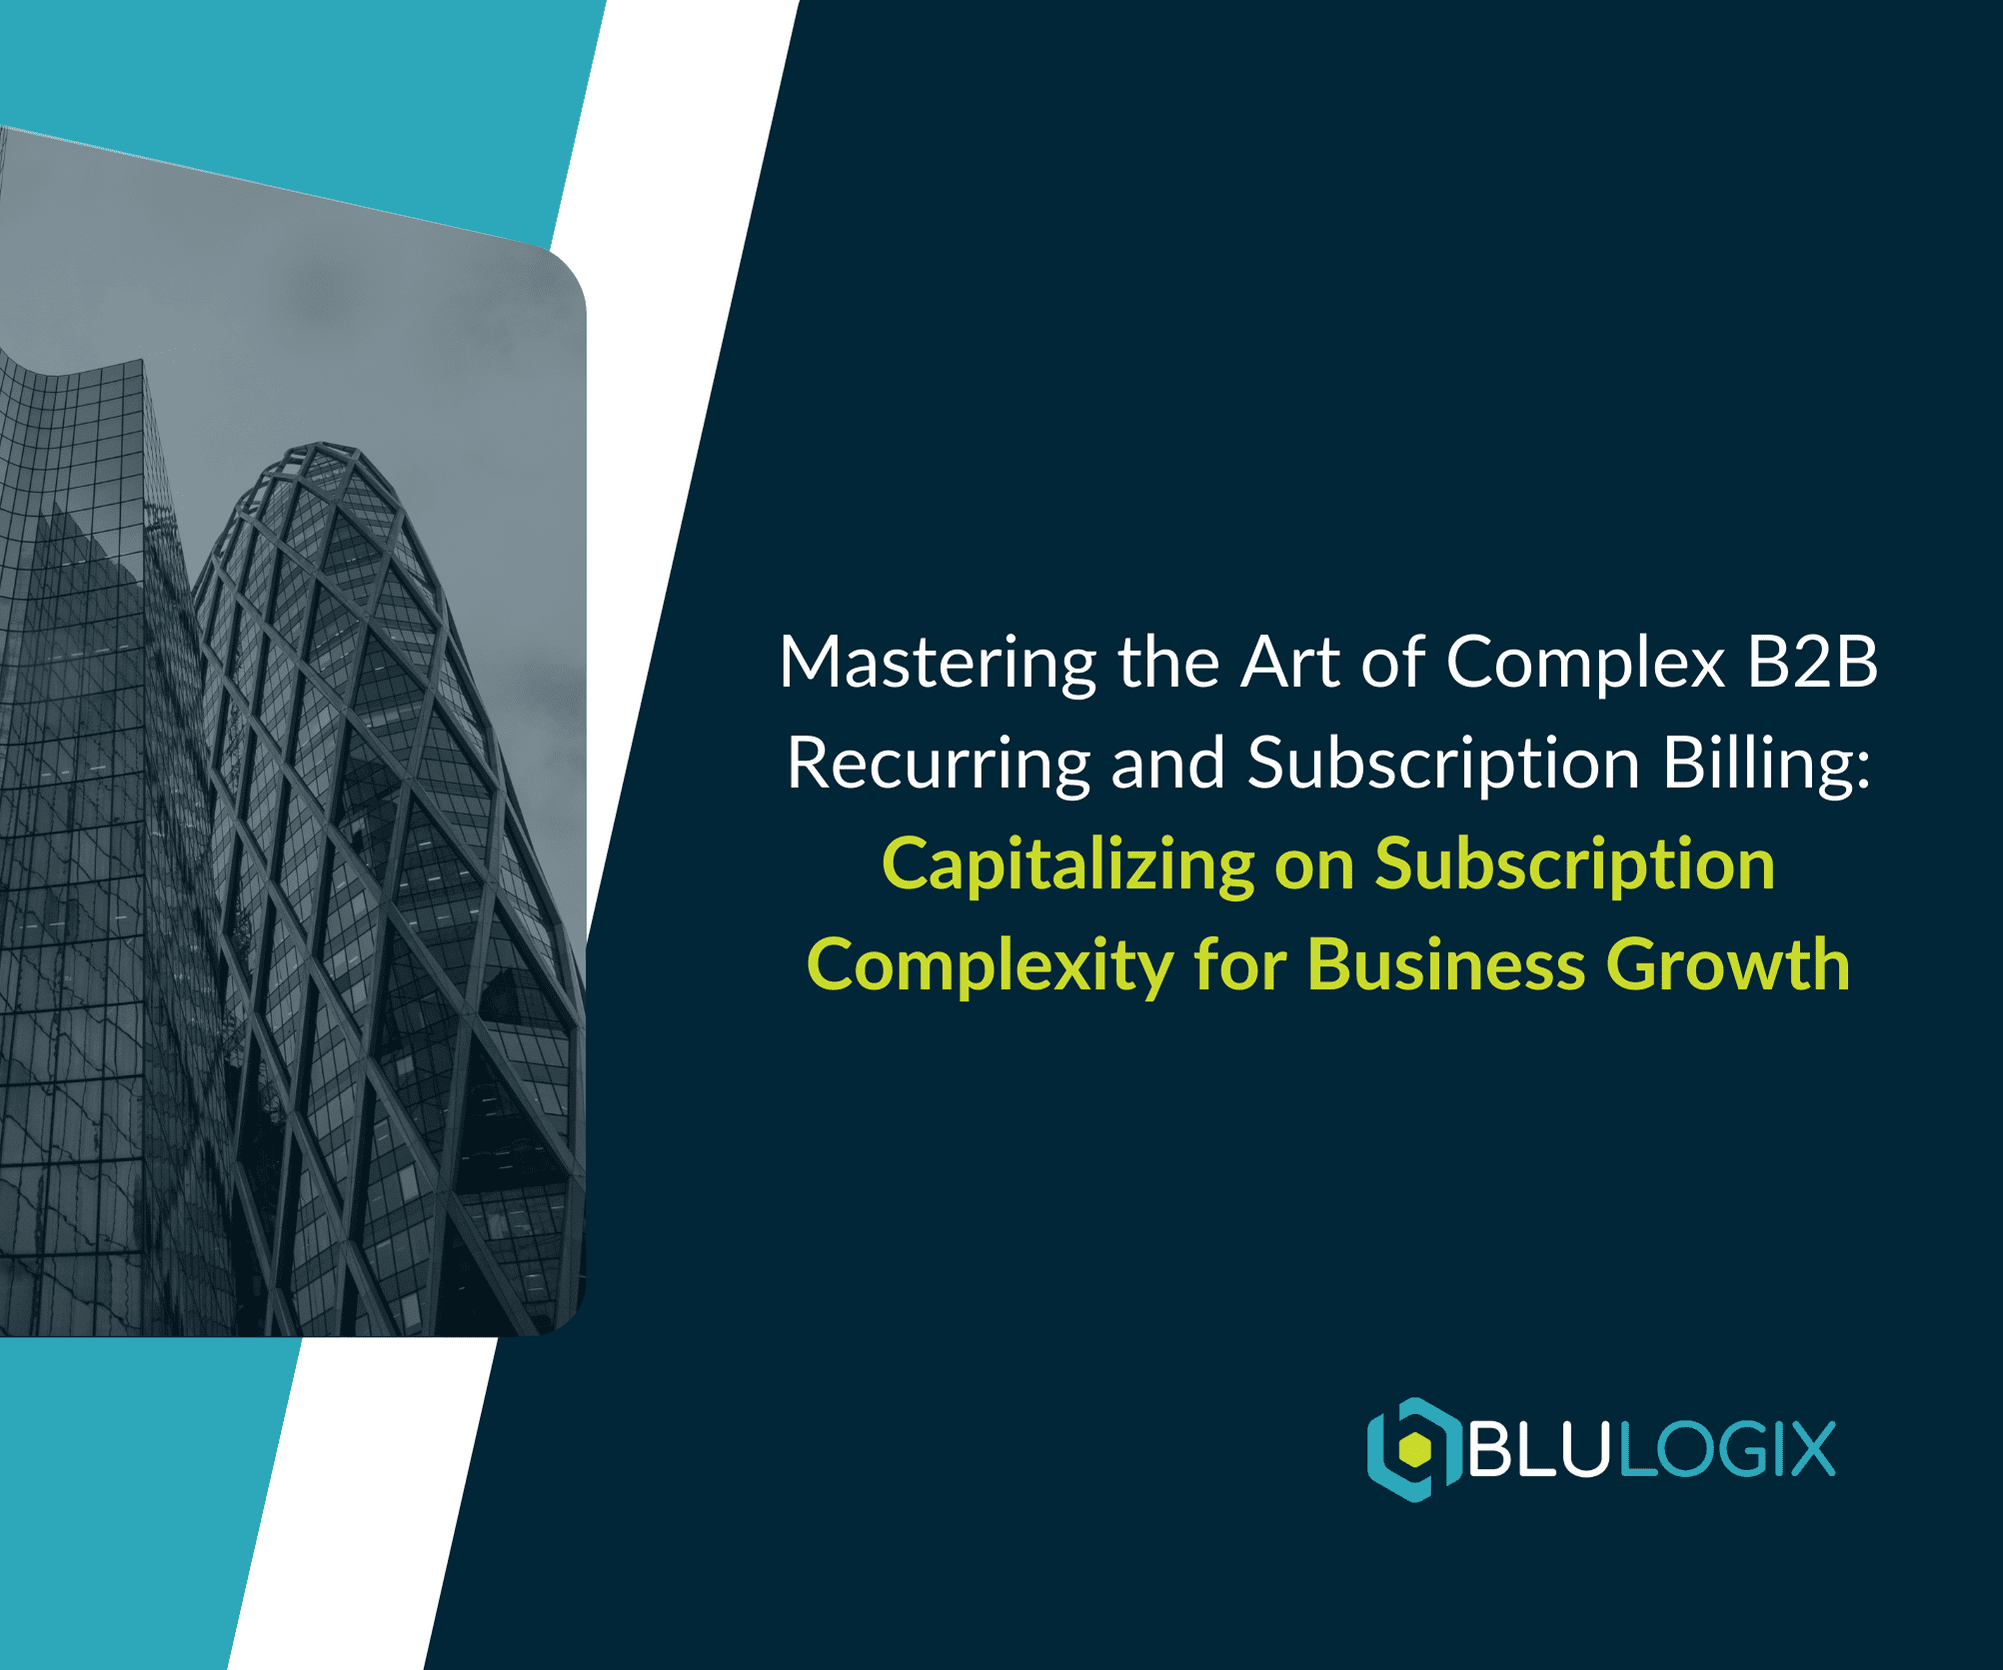 Mastering the Art of Complex B2B Recurring and Subscription Billing Capitalizing on Subscription Complexity for Business Growth